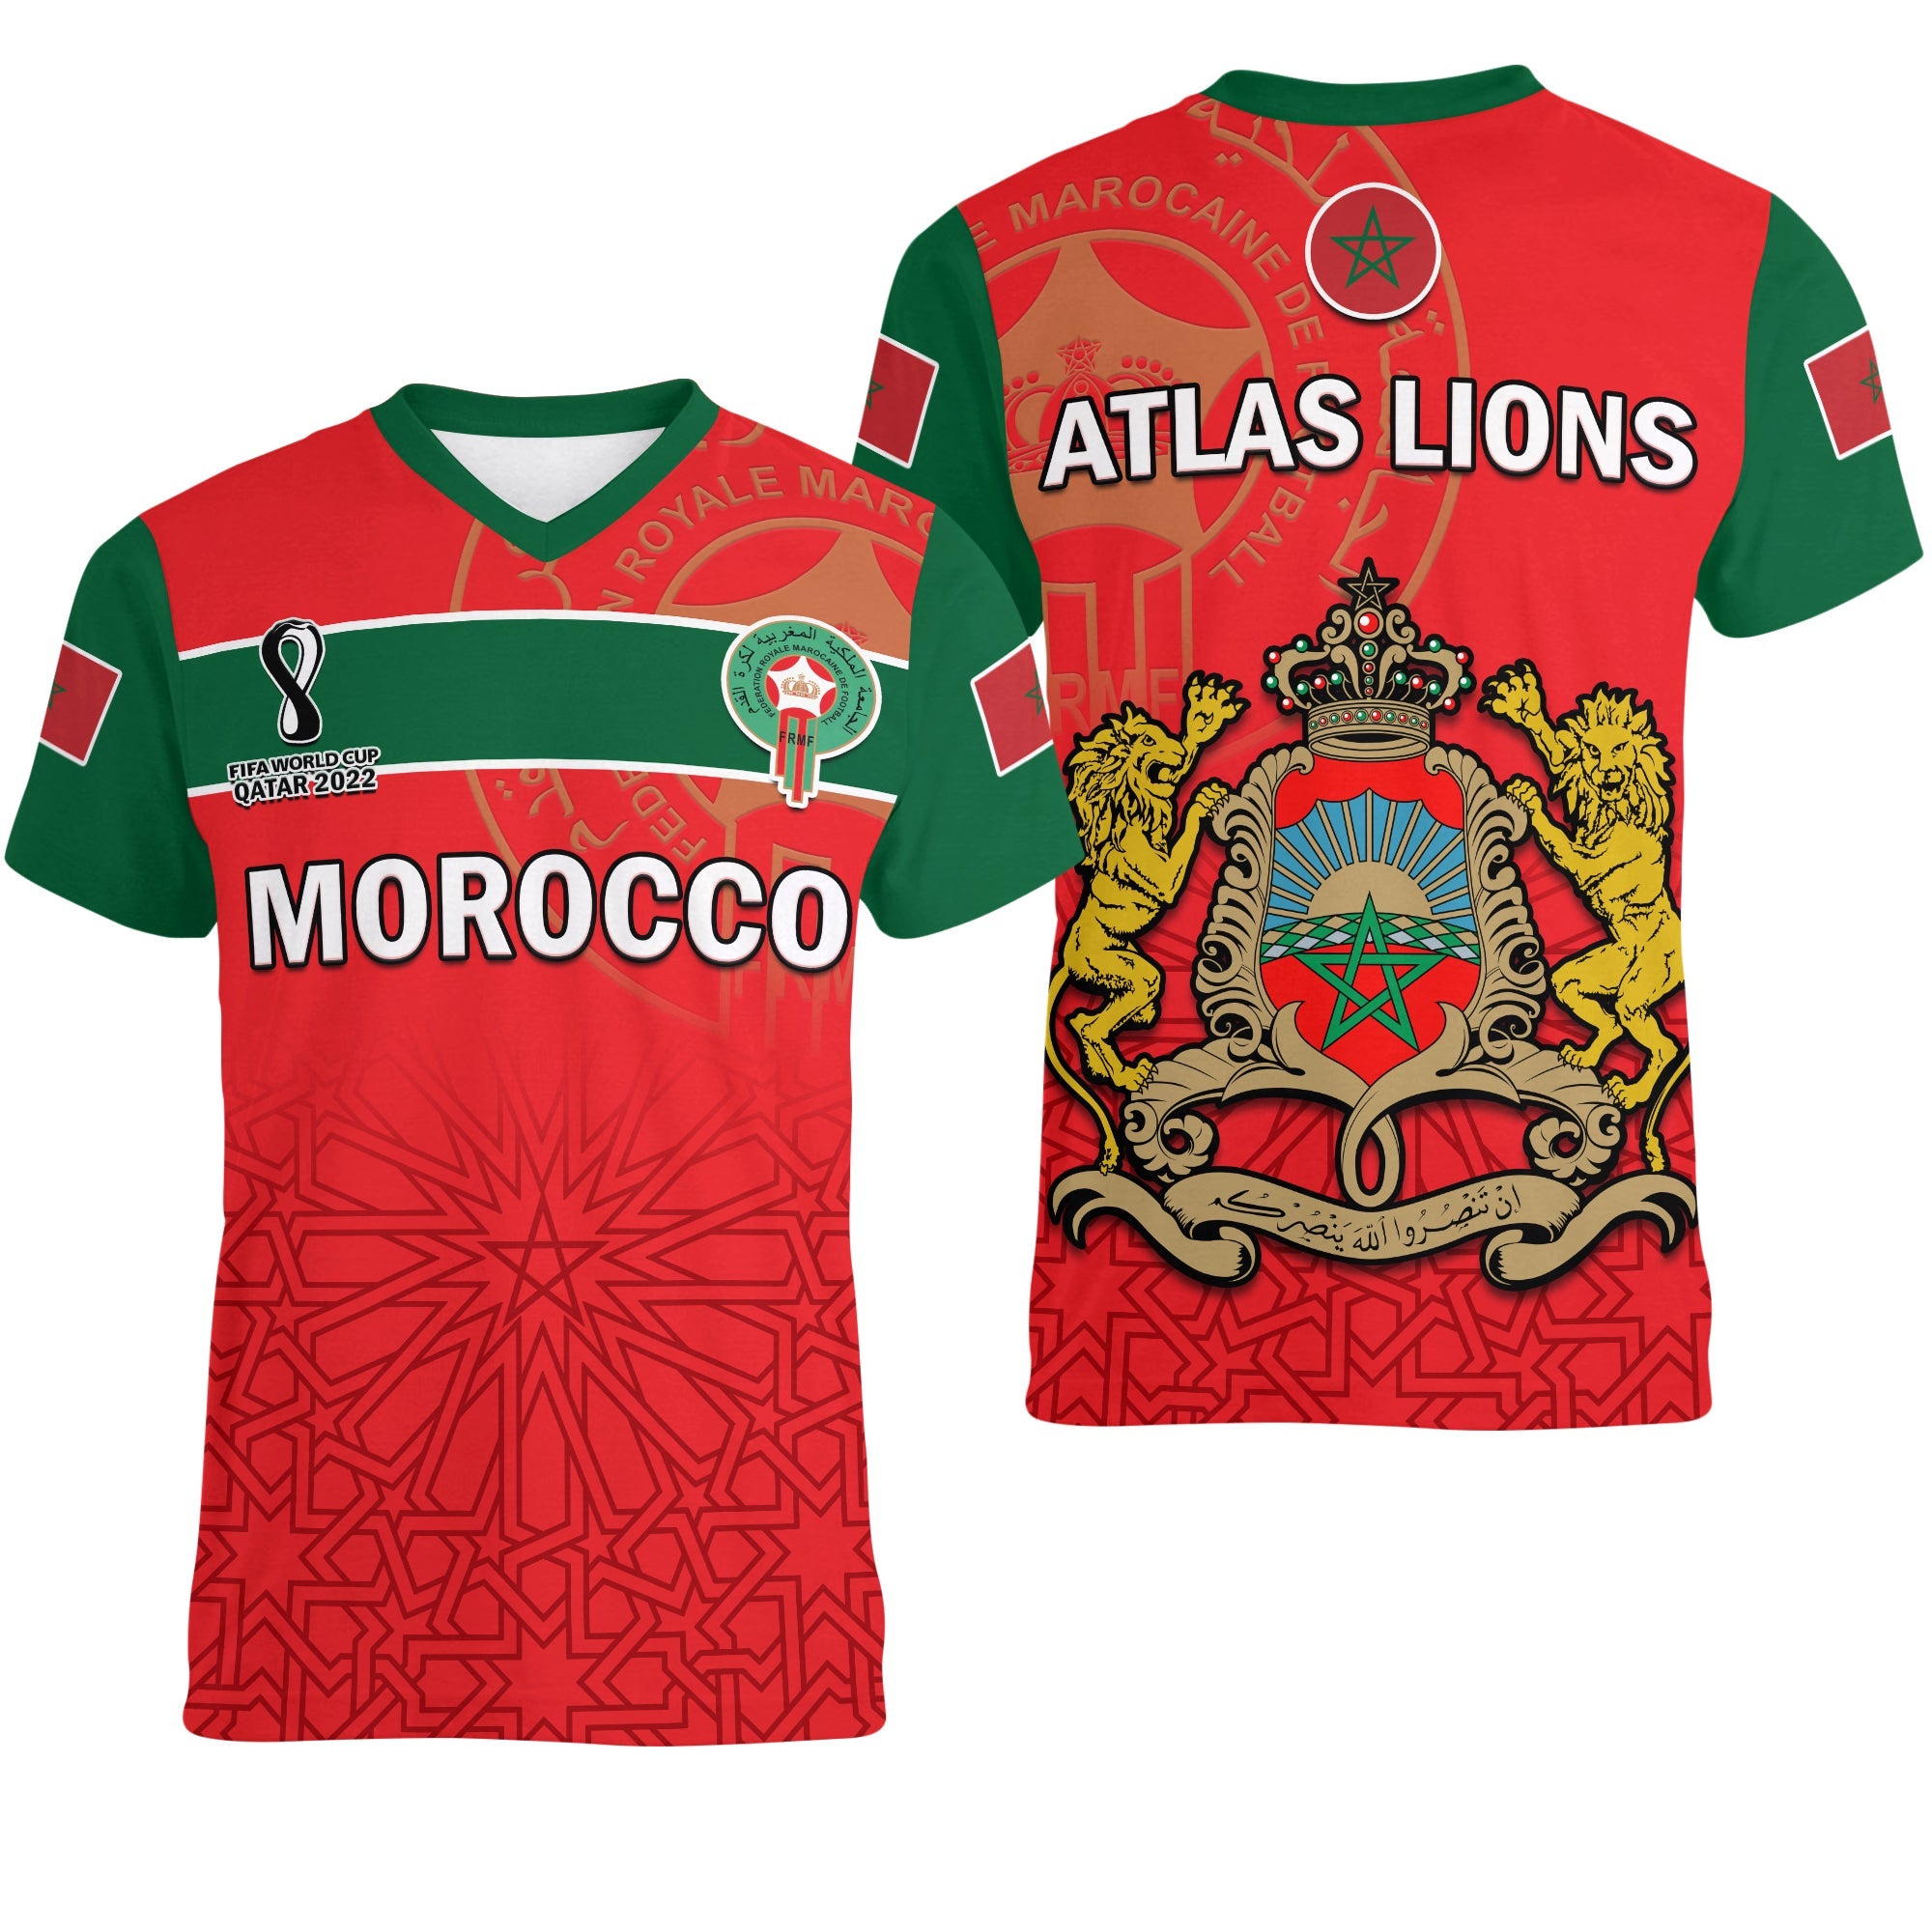 morocco-football-v-neck-t-shirt-atlas-lions-red-world-cup-2022